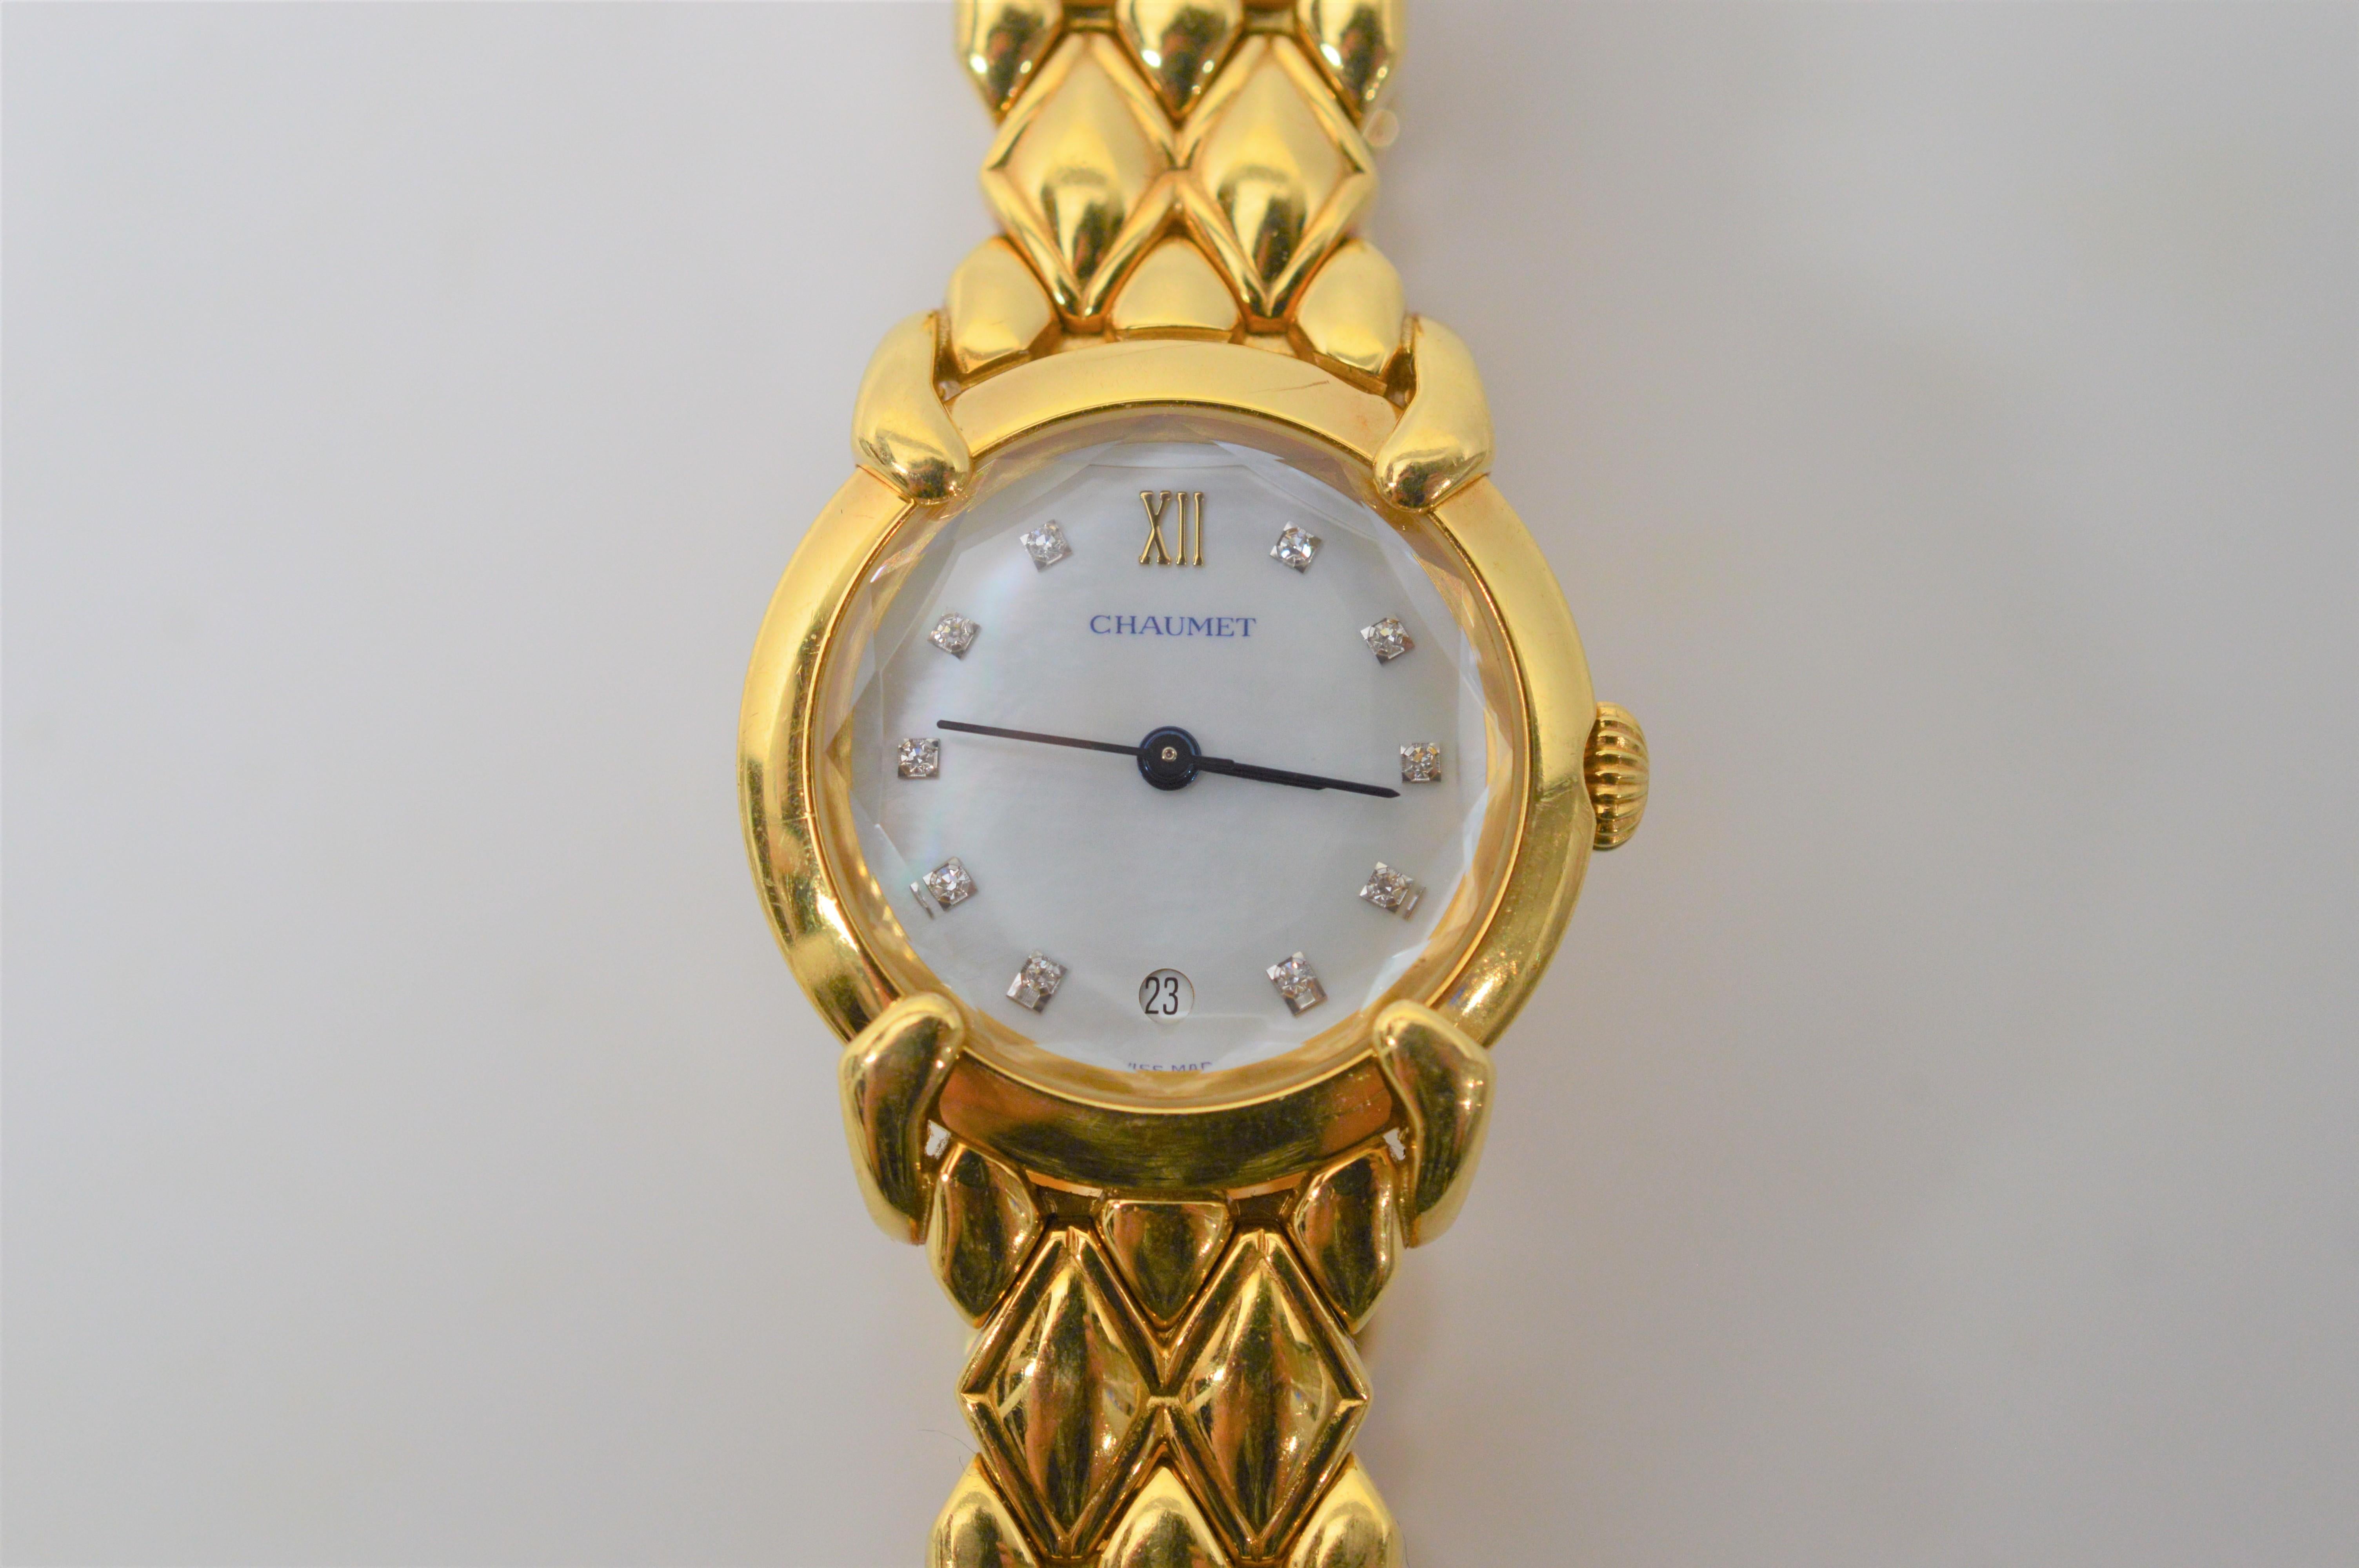 18 Karat Yellow Gold and Diamond Ladies Chaumet Paris Elysses Quartz  Bracelet Watch. Diamonds mark each hour on the 24mm Mother of Pearl watch face. The substantial 18 karat yellow gold band is outfitted with a disappearing hinge closure and the